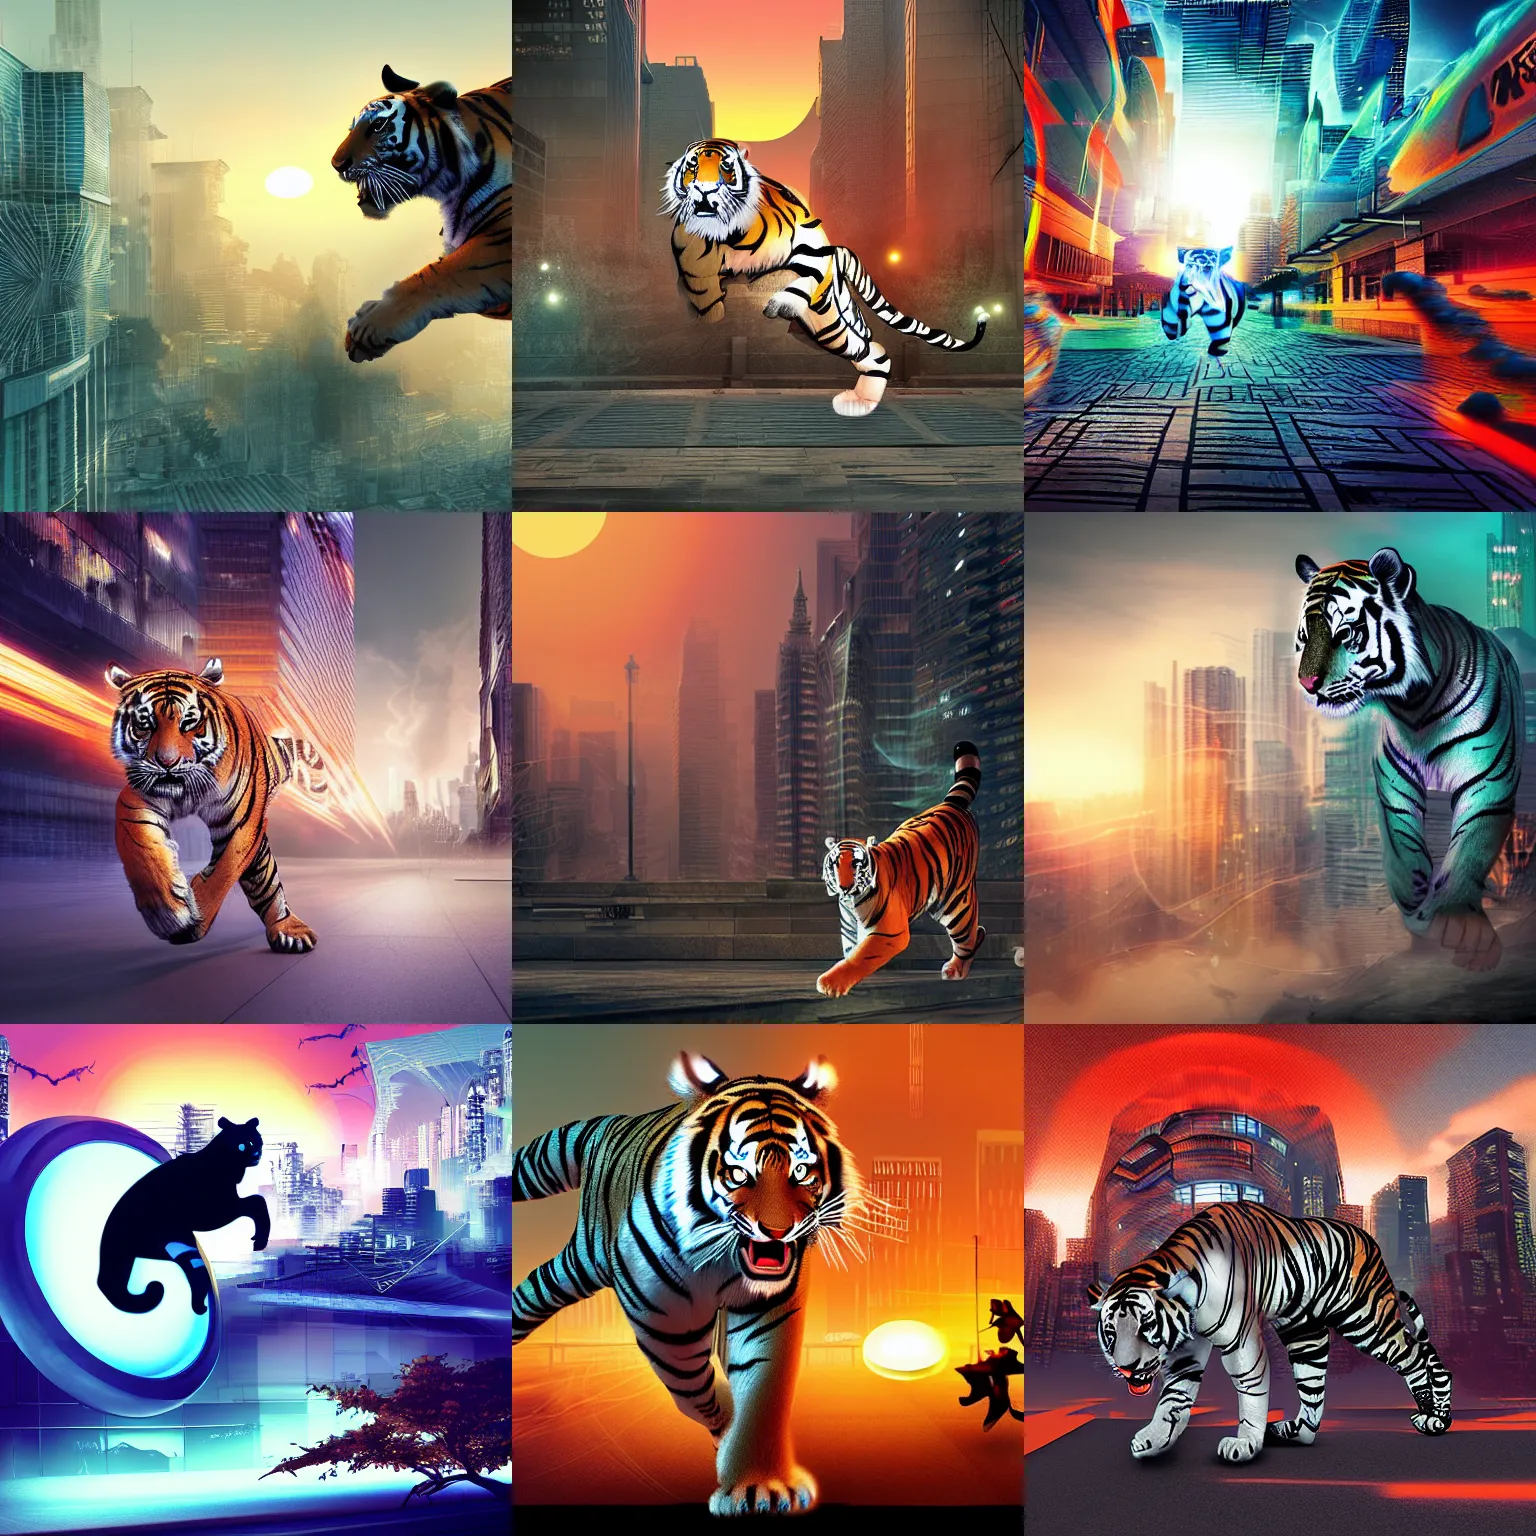 Prompt: A ghostly tiger chasing a ninja wearing digital material garb through the futuristic city at sunset, digital art